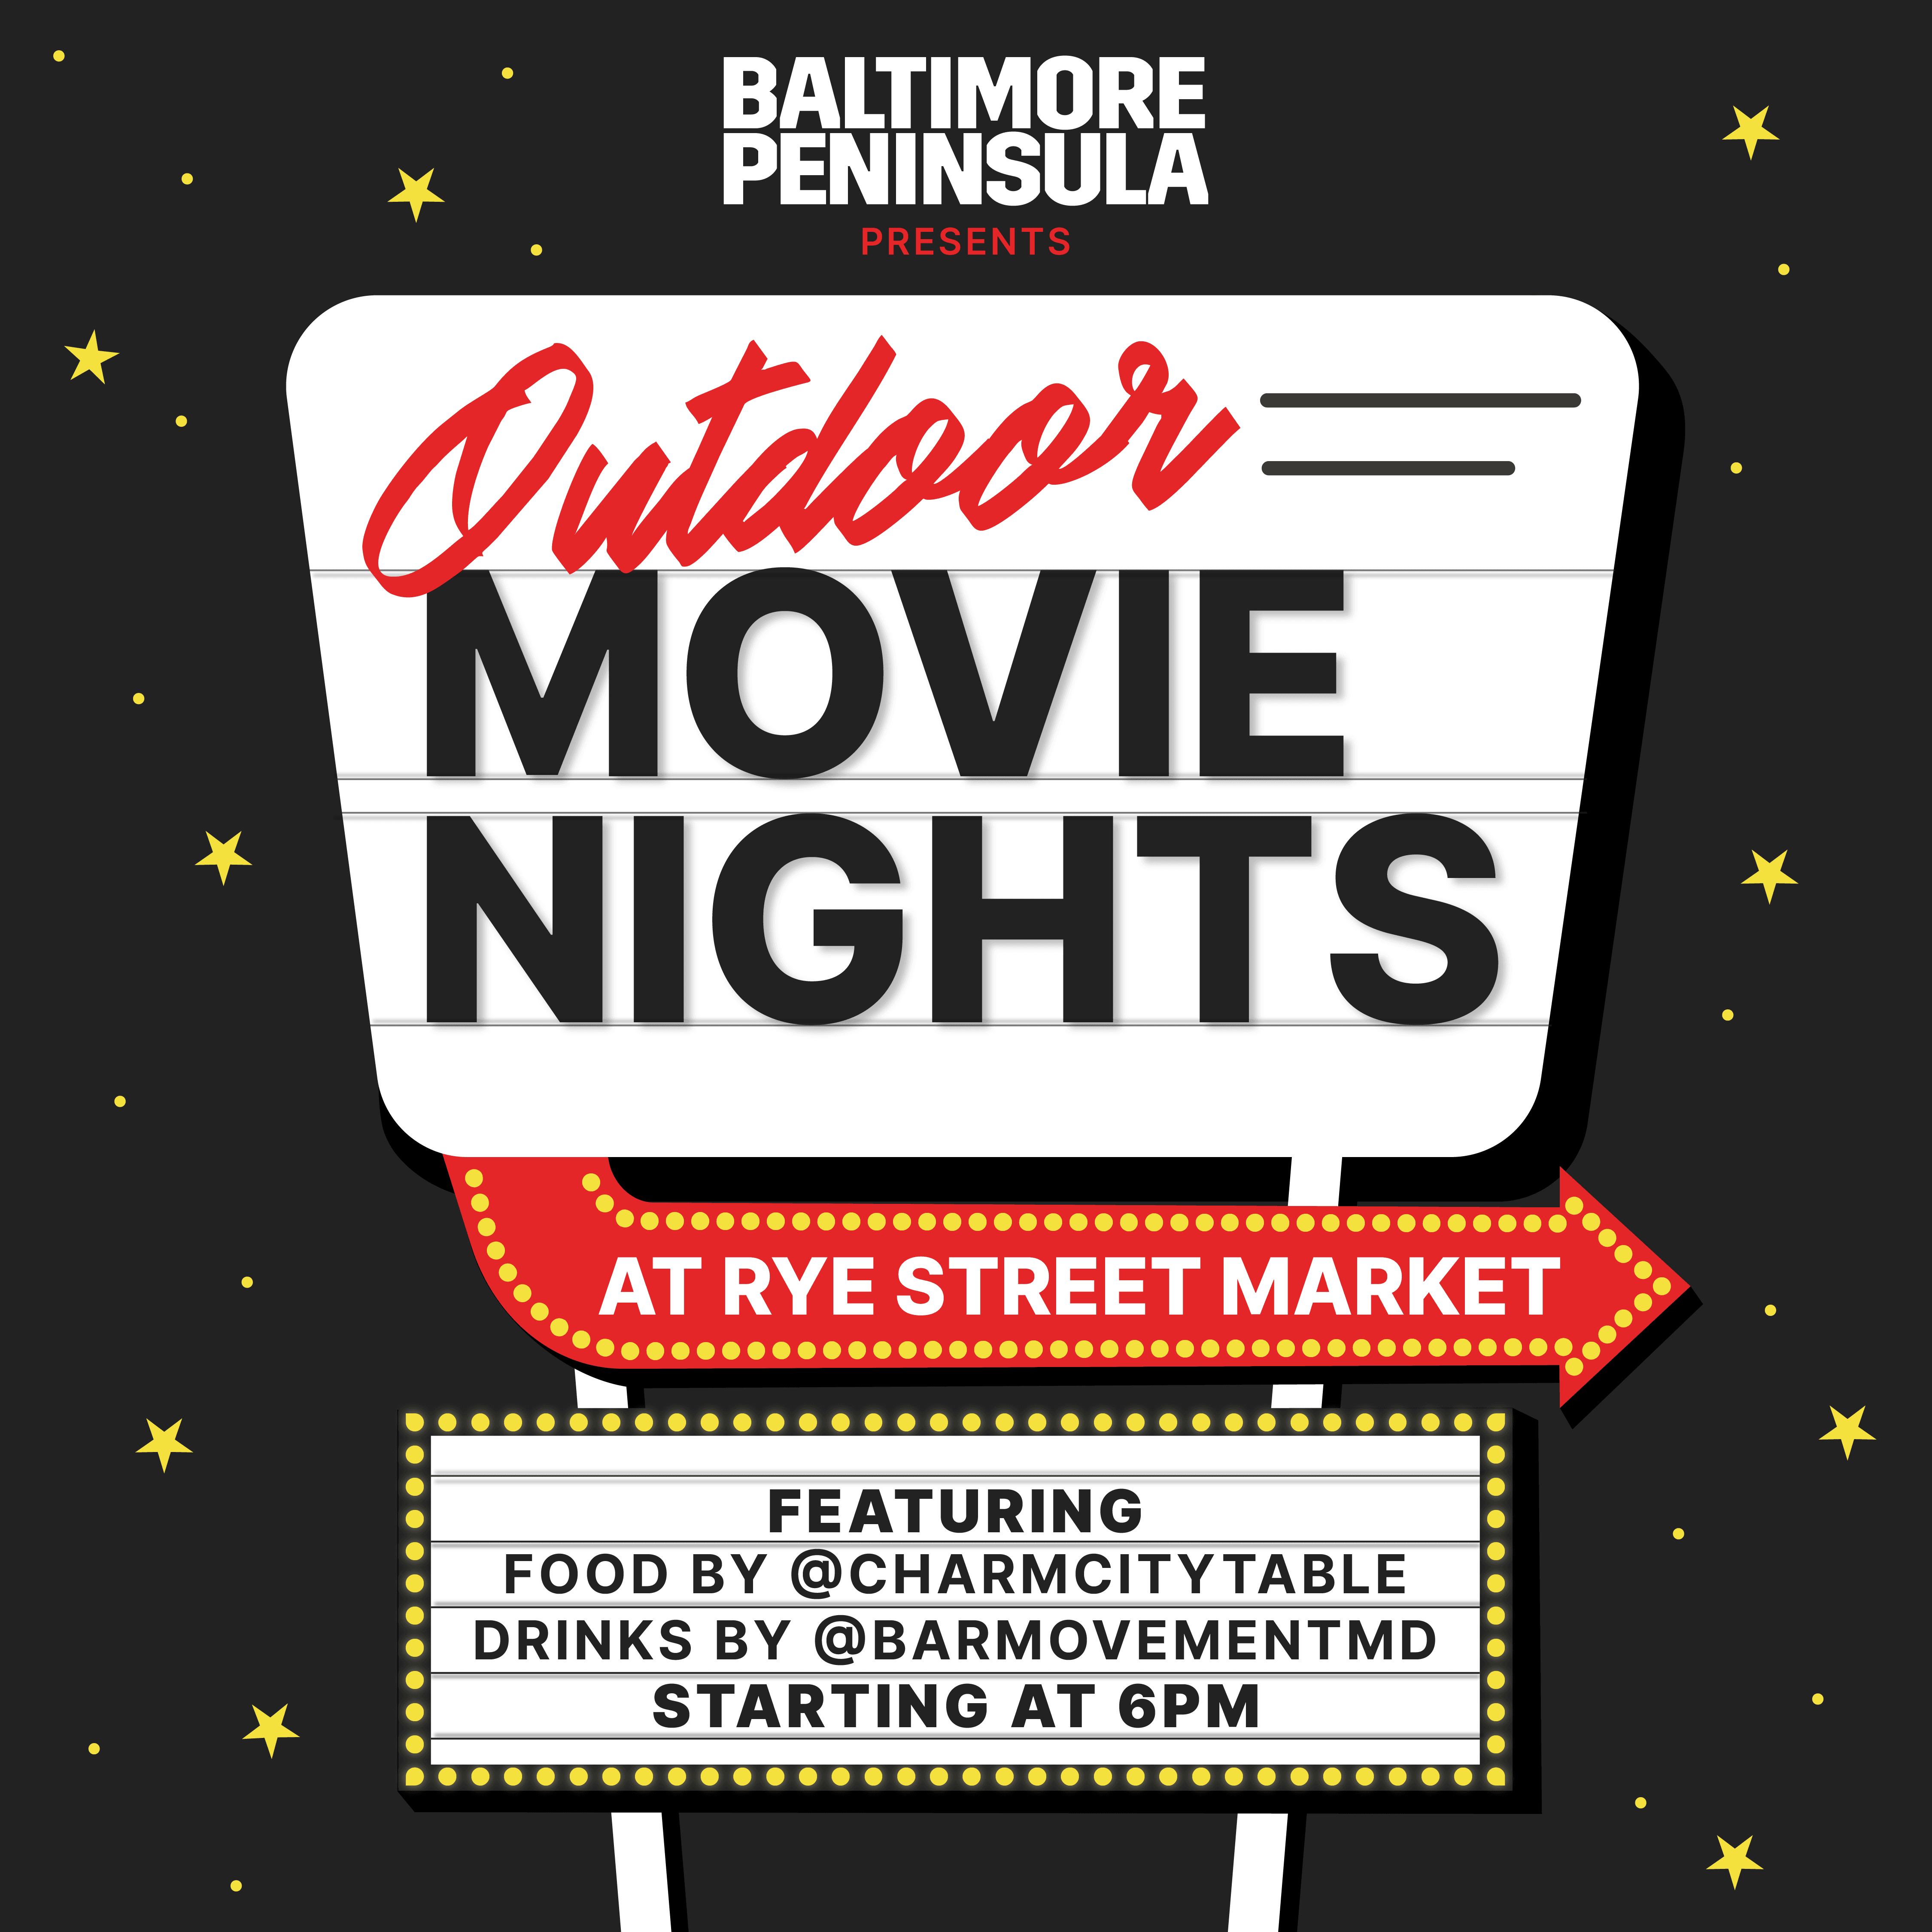 📅 Mark your calendars for Friday, June 9th at 6pm, as we kick off our Outdoor Movie Night series! 🌌✨ 